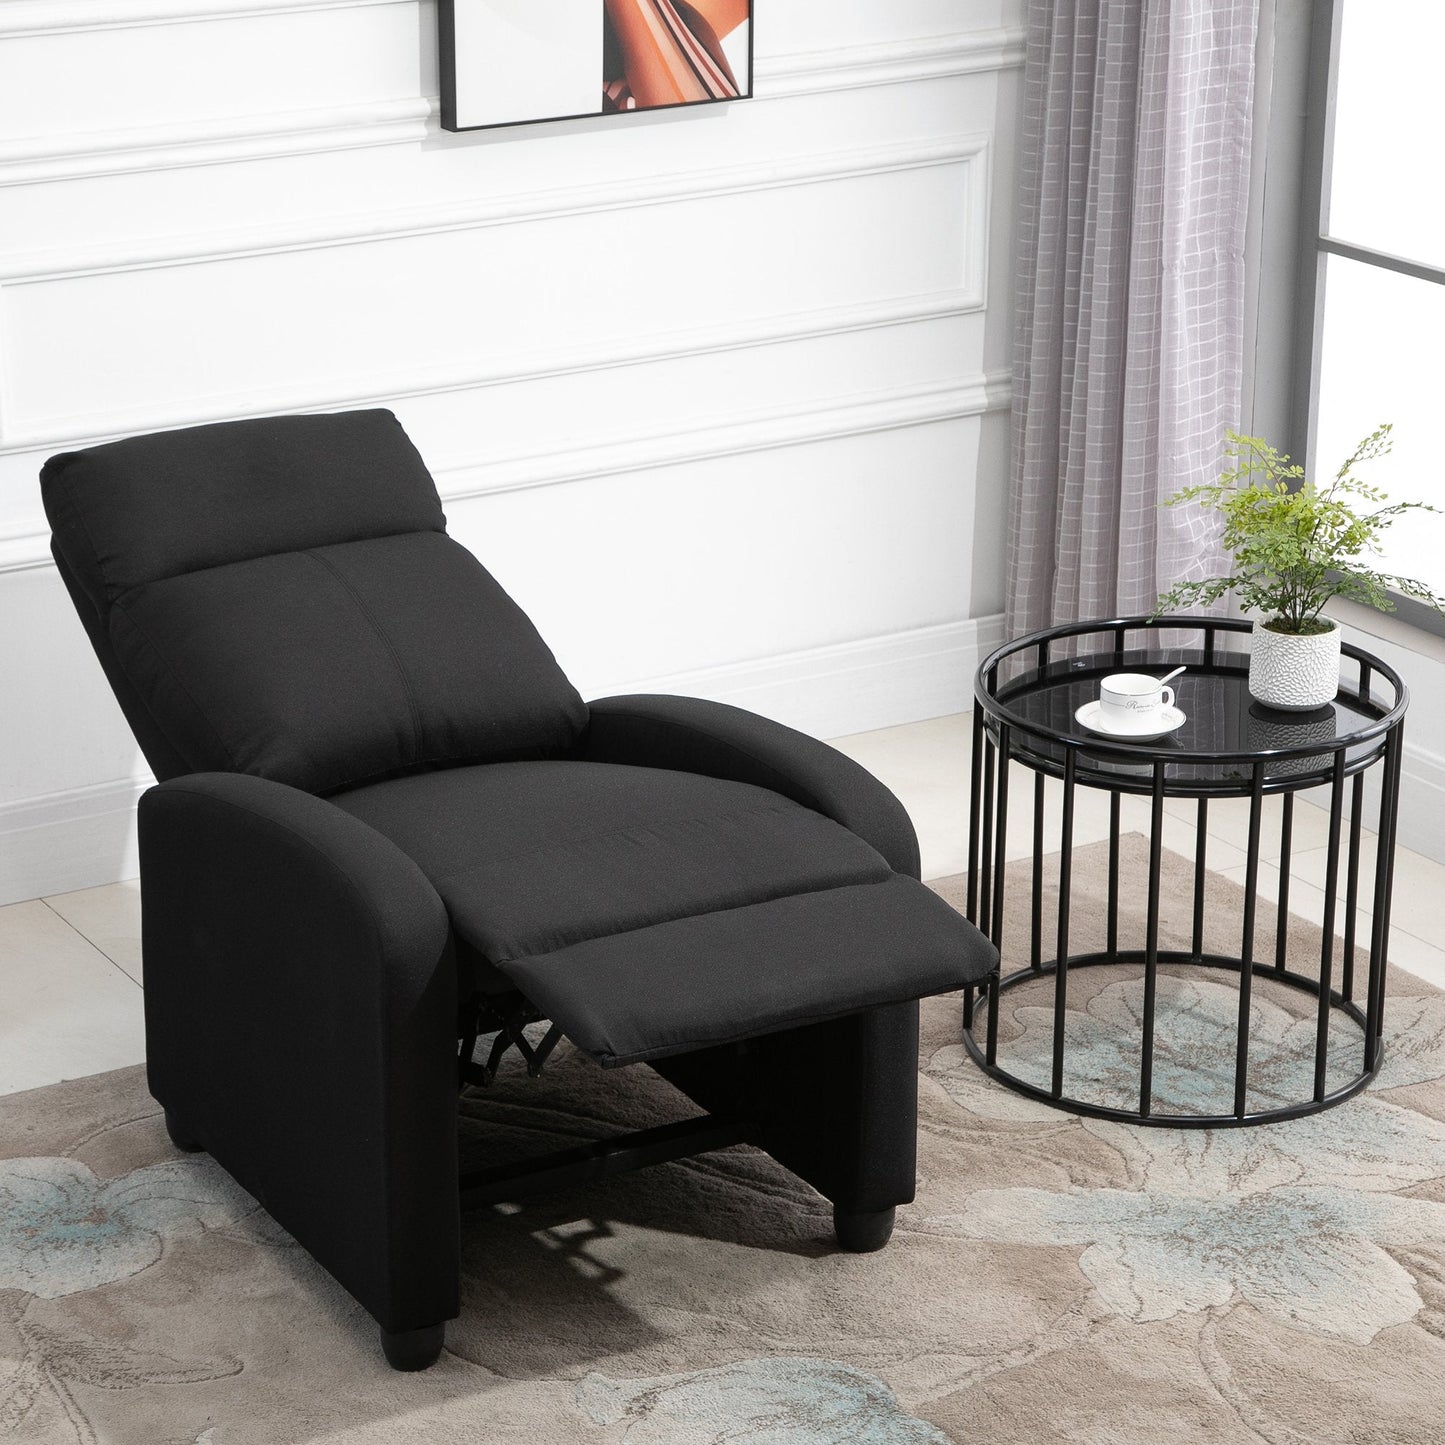 Padded Relax Armchair With Reclinable Back and Pullified Pypiece In Black Fabric